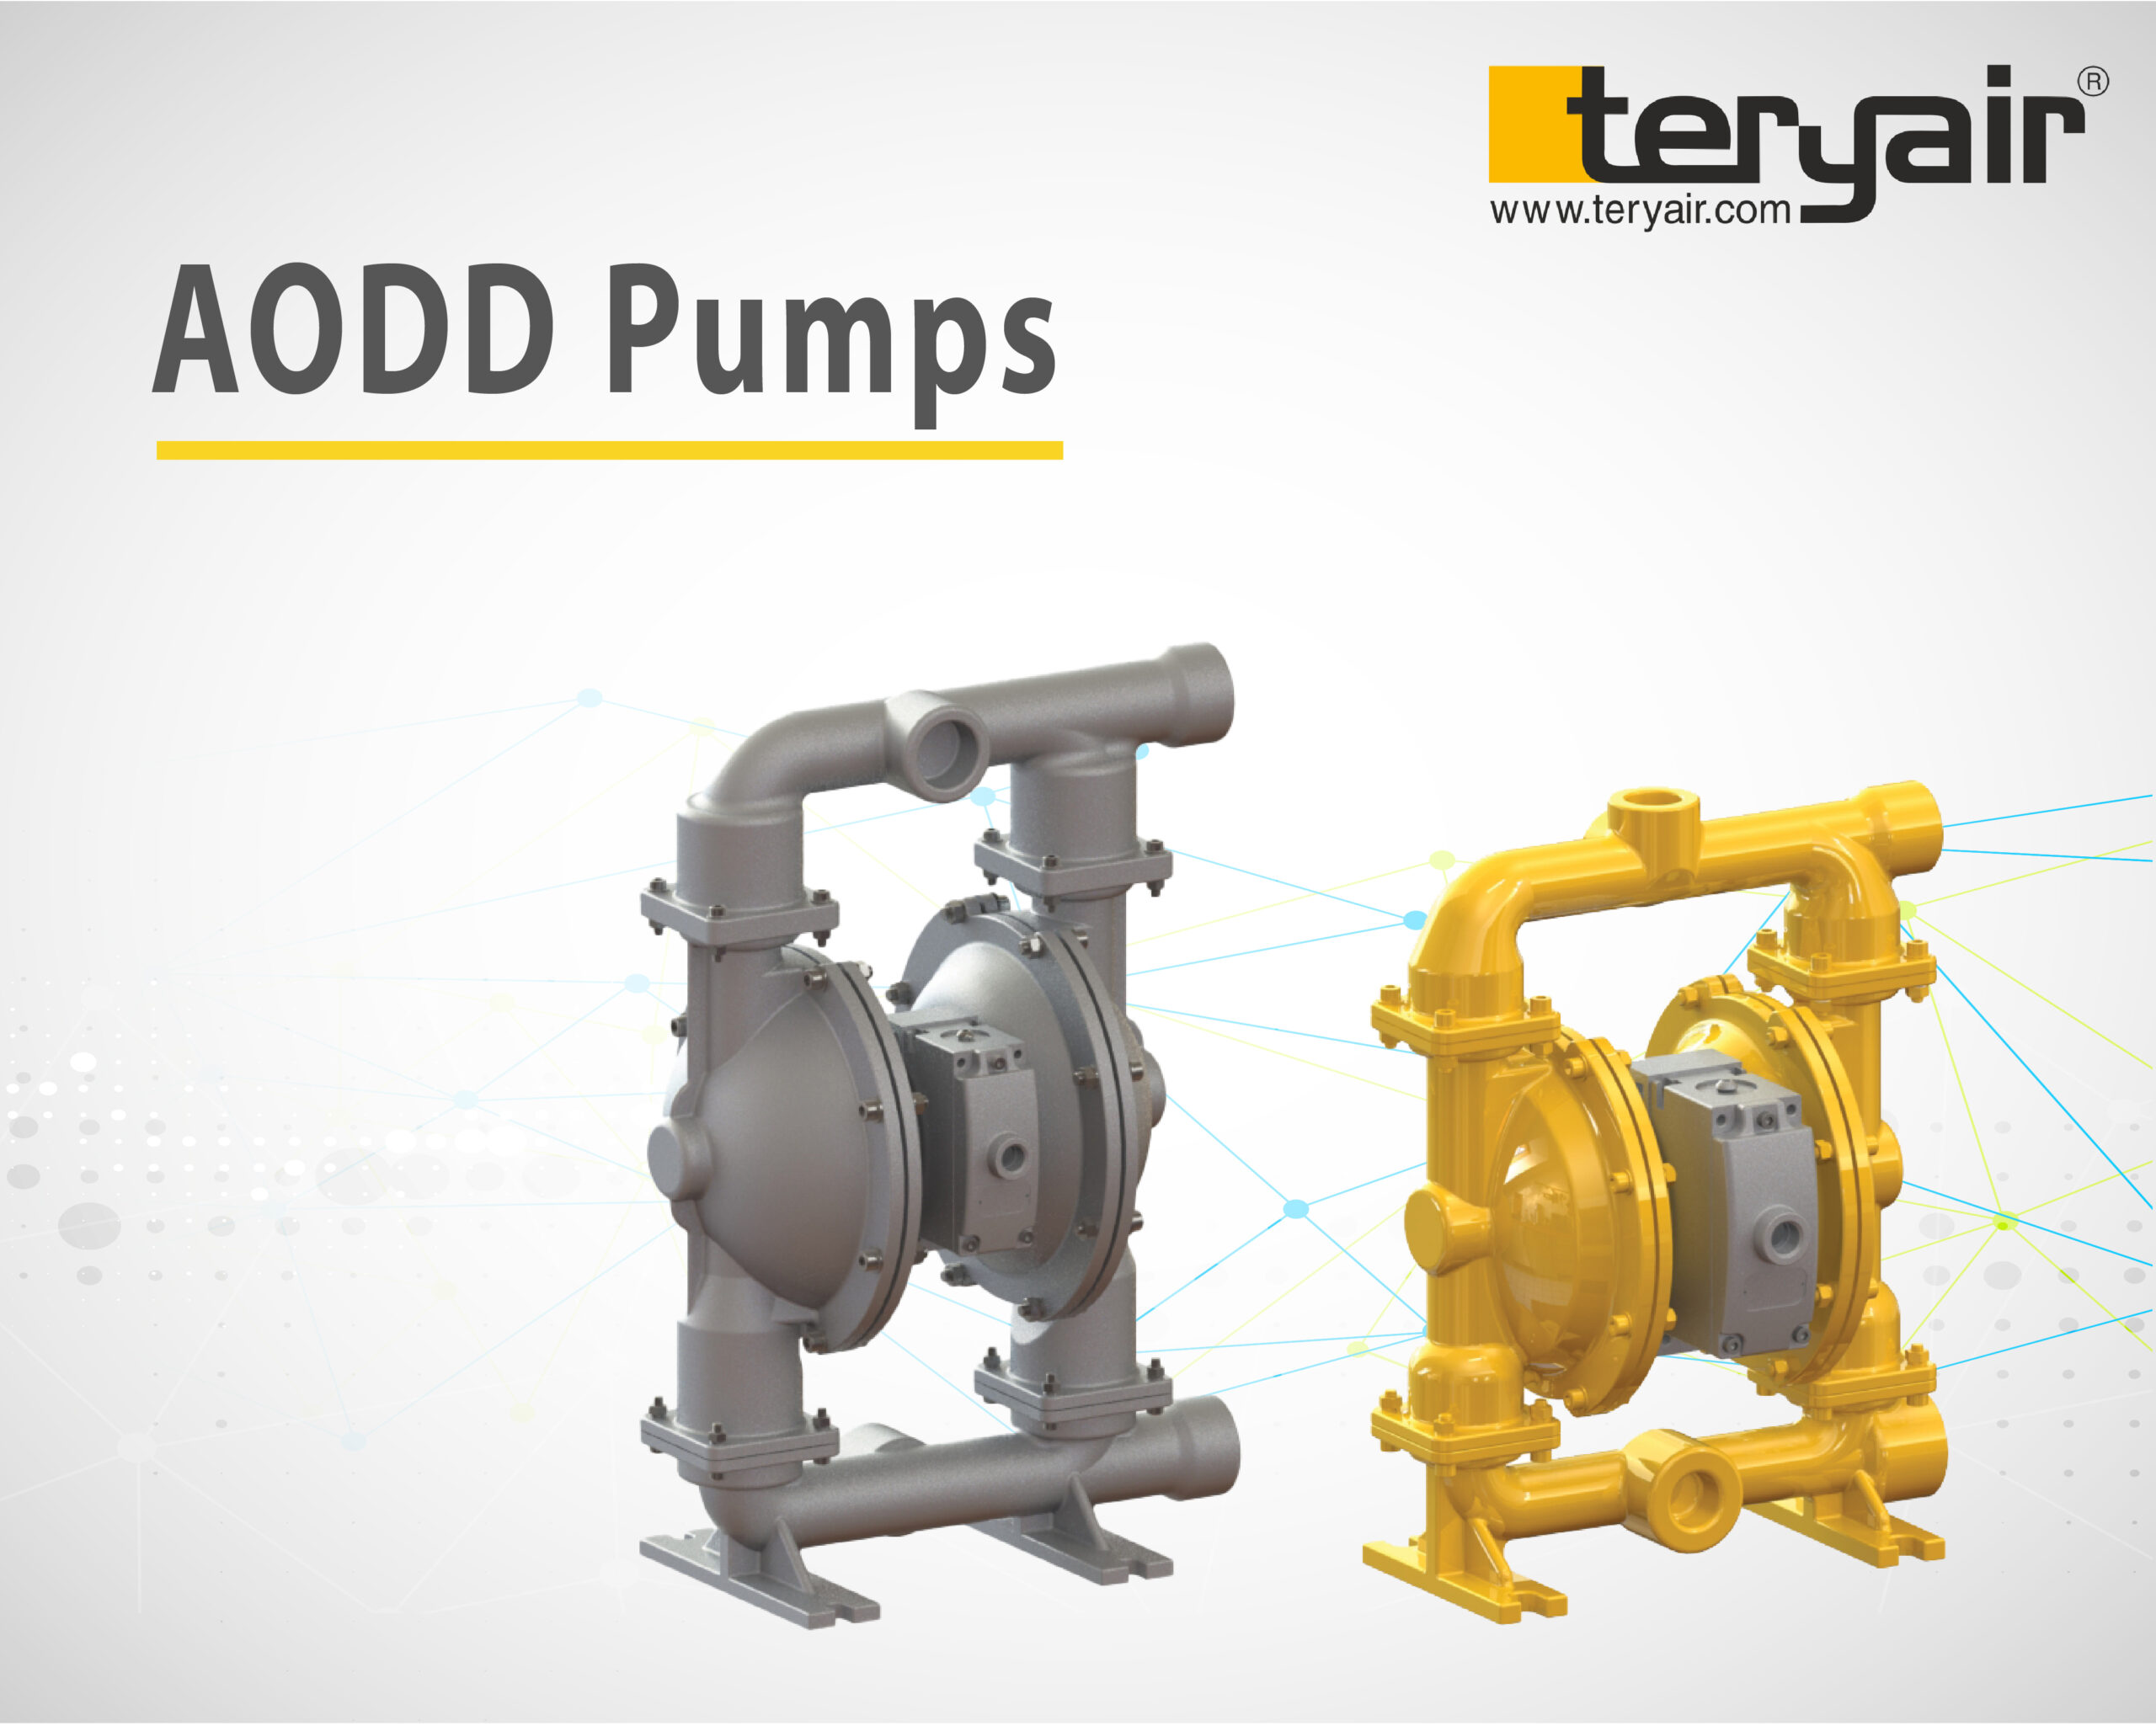 Teryair Equipment Receives US Patent Approval  for Innovative Non-Stall Valve for AODD Pumps